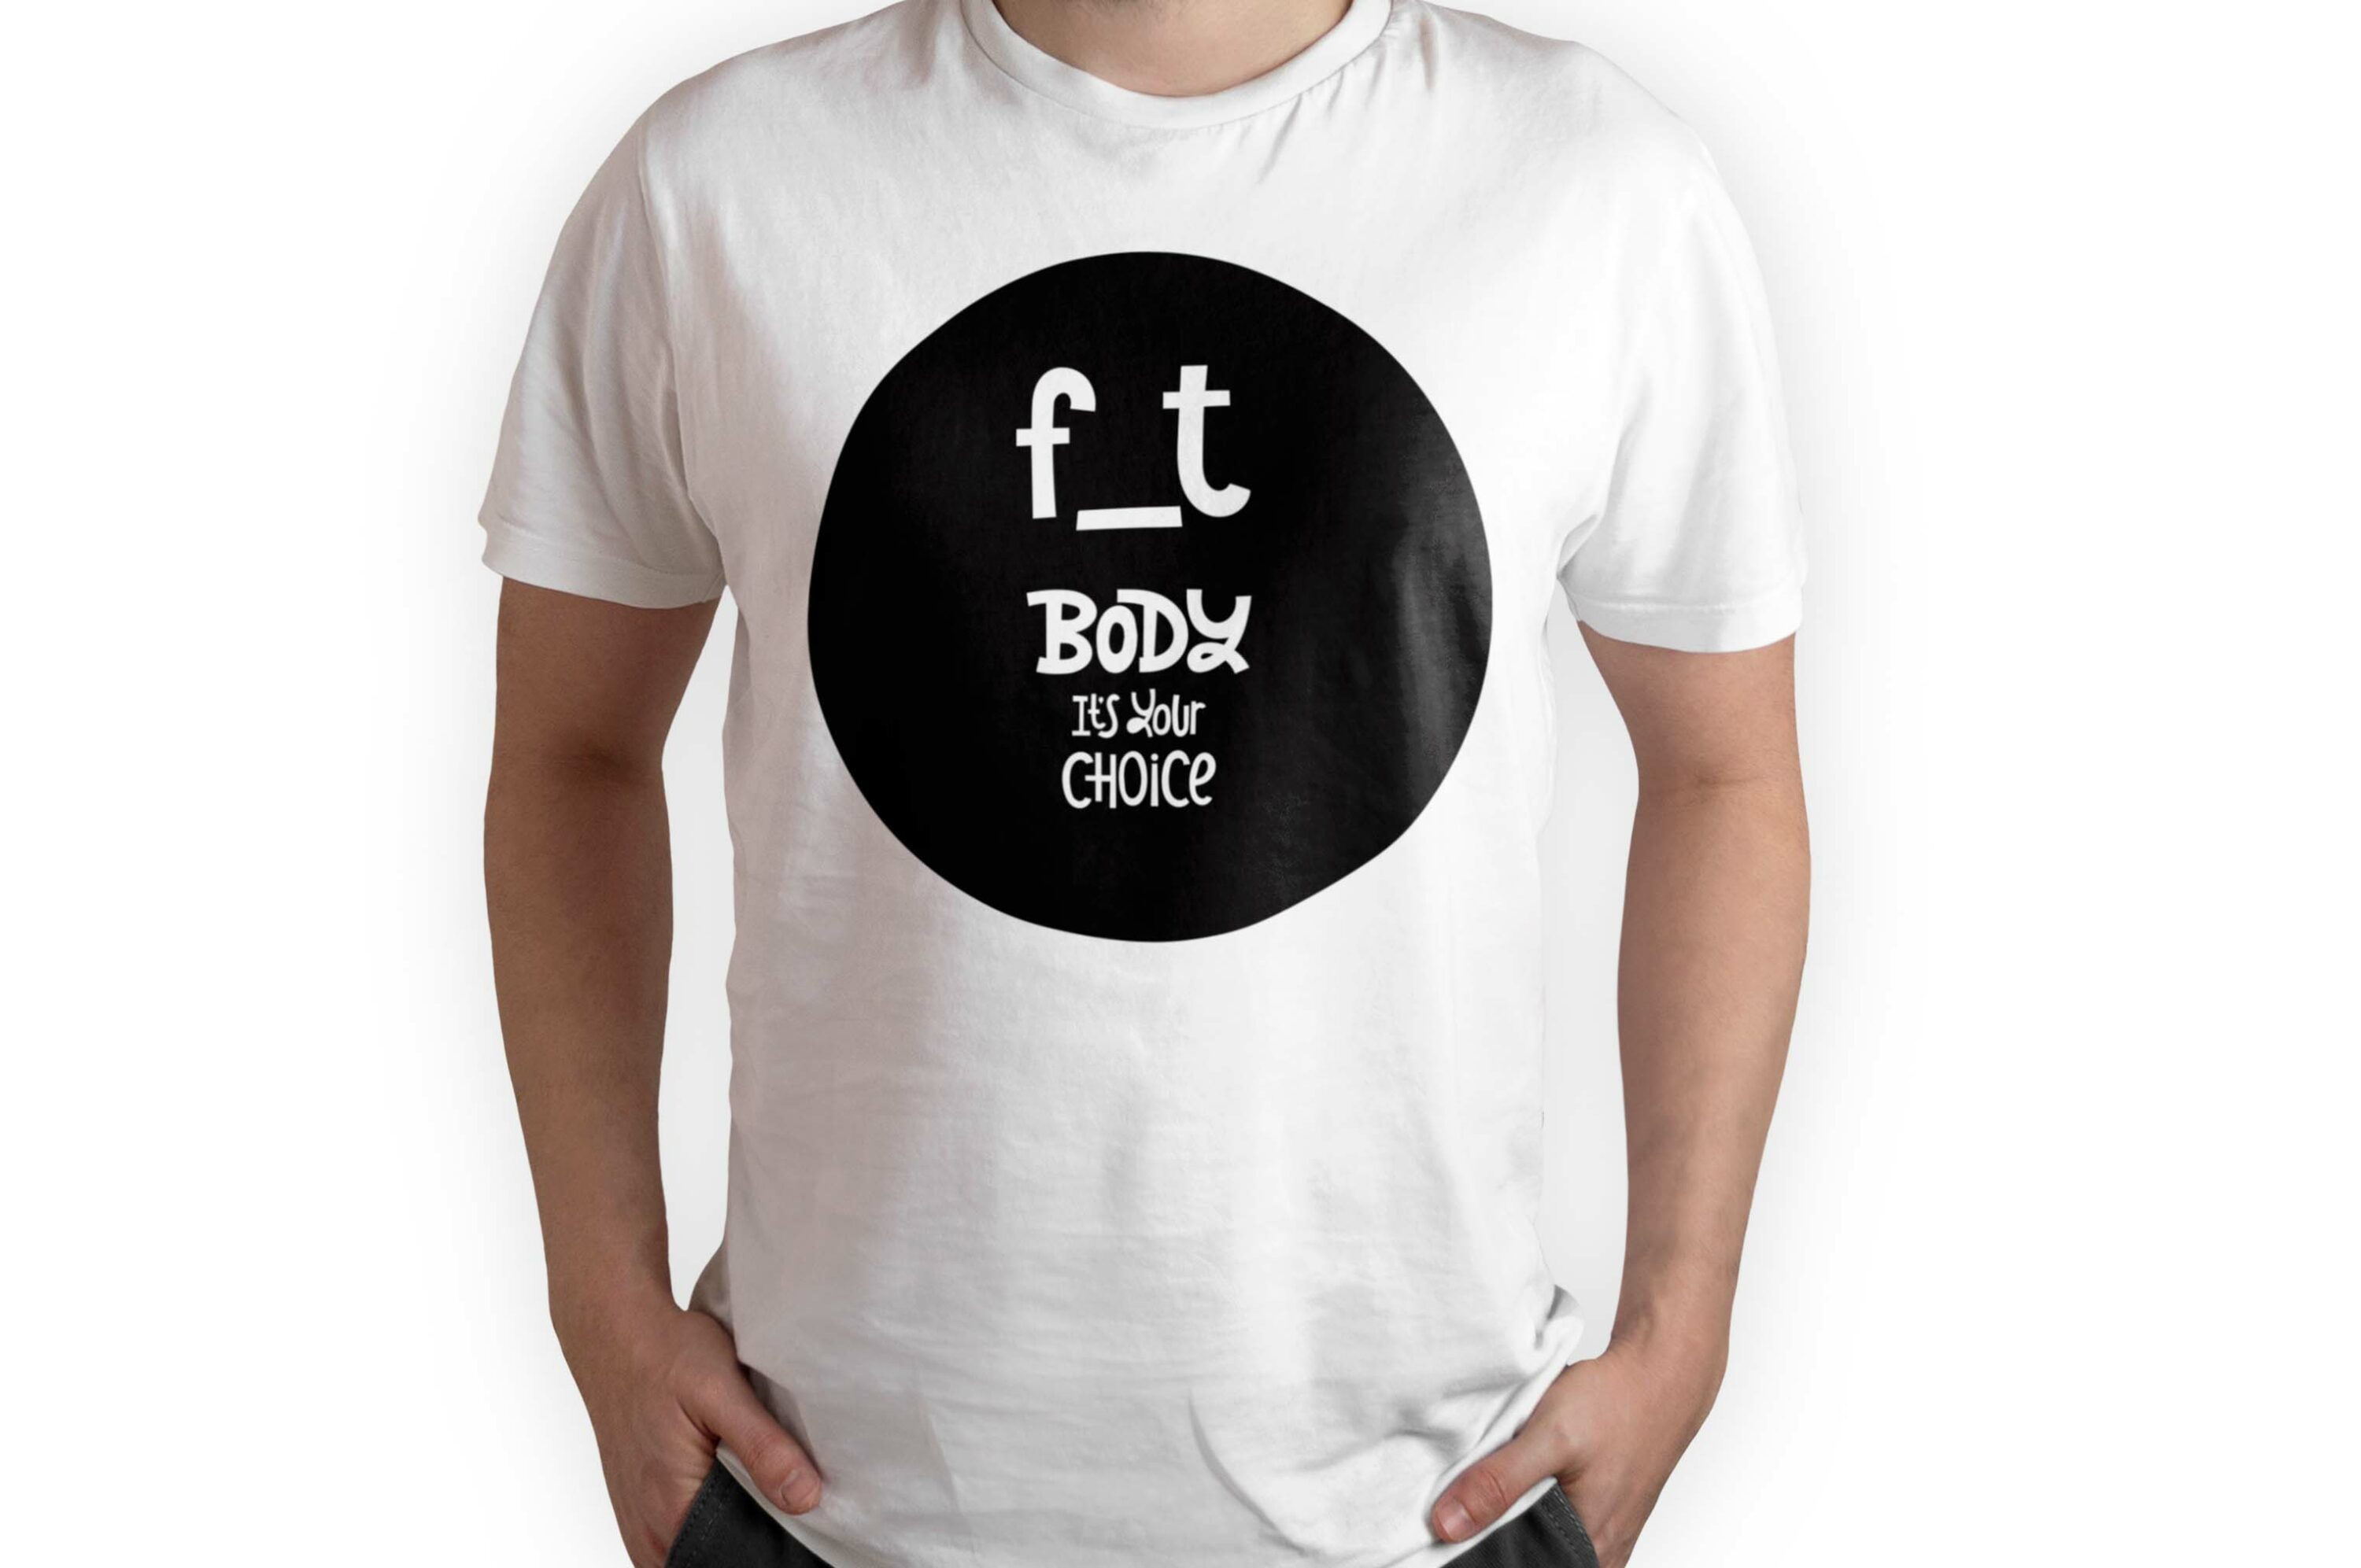 Bundle of 156 T-shirt Designs with Fitness Quotes, f_t body it's your choice in black circle.